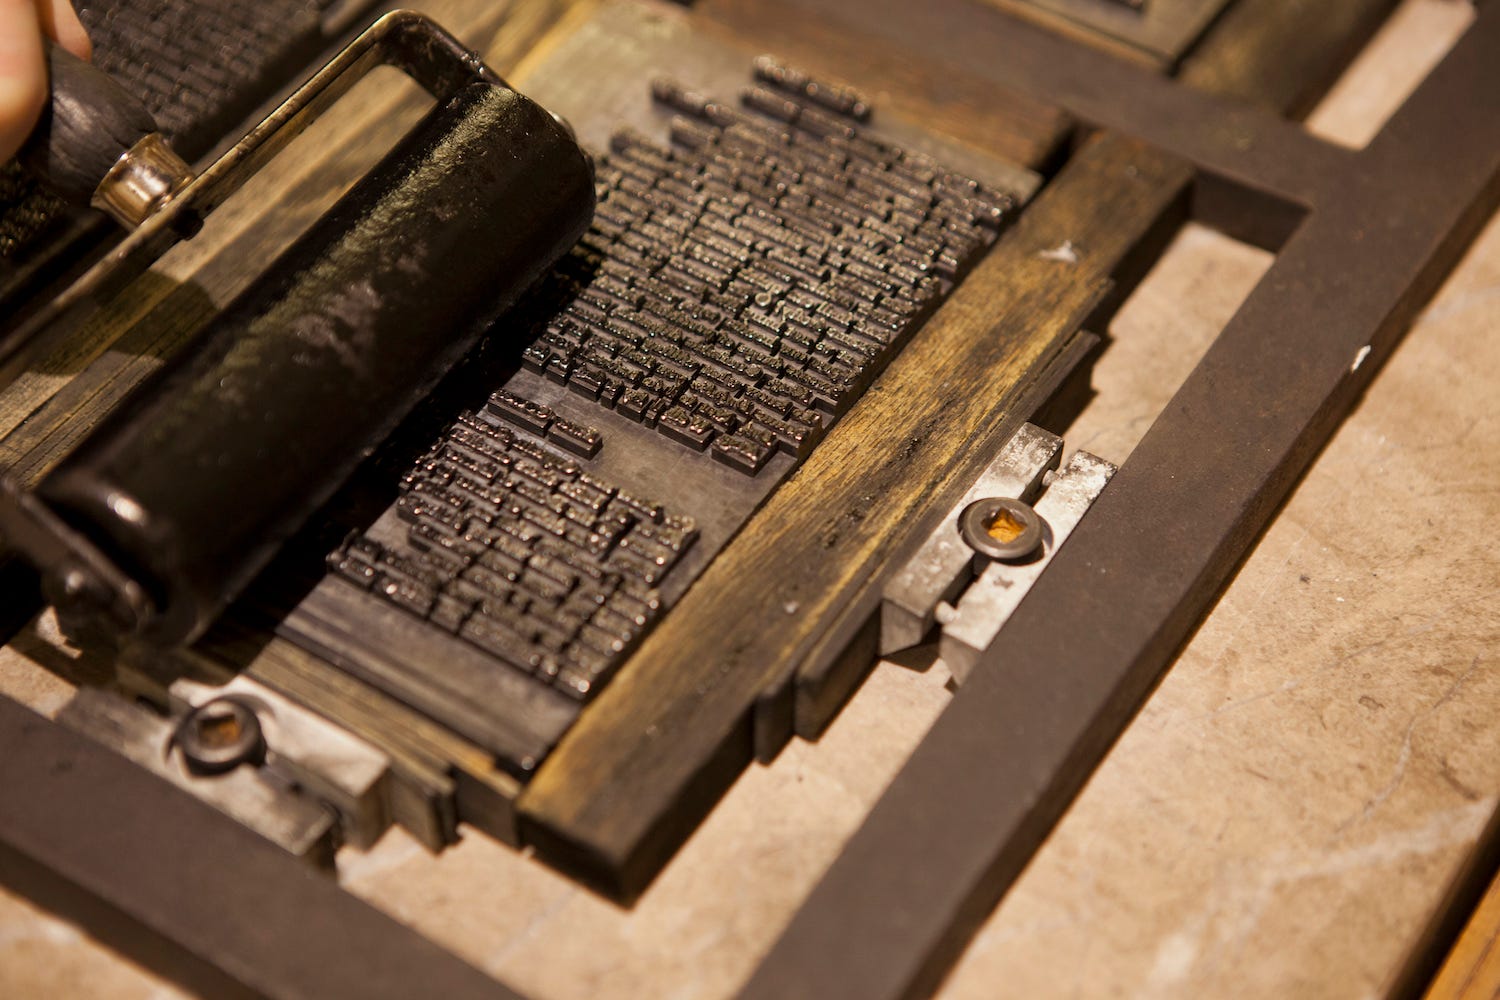 Publishing Shakespeare: a history of the printing press